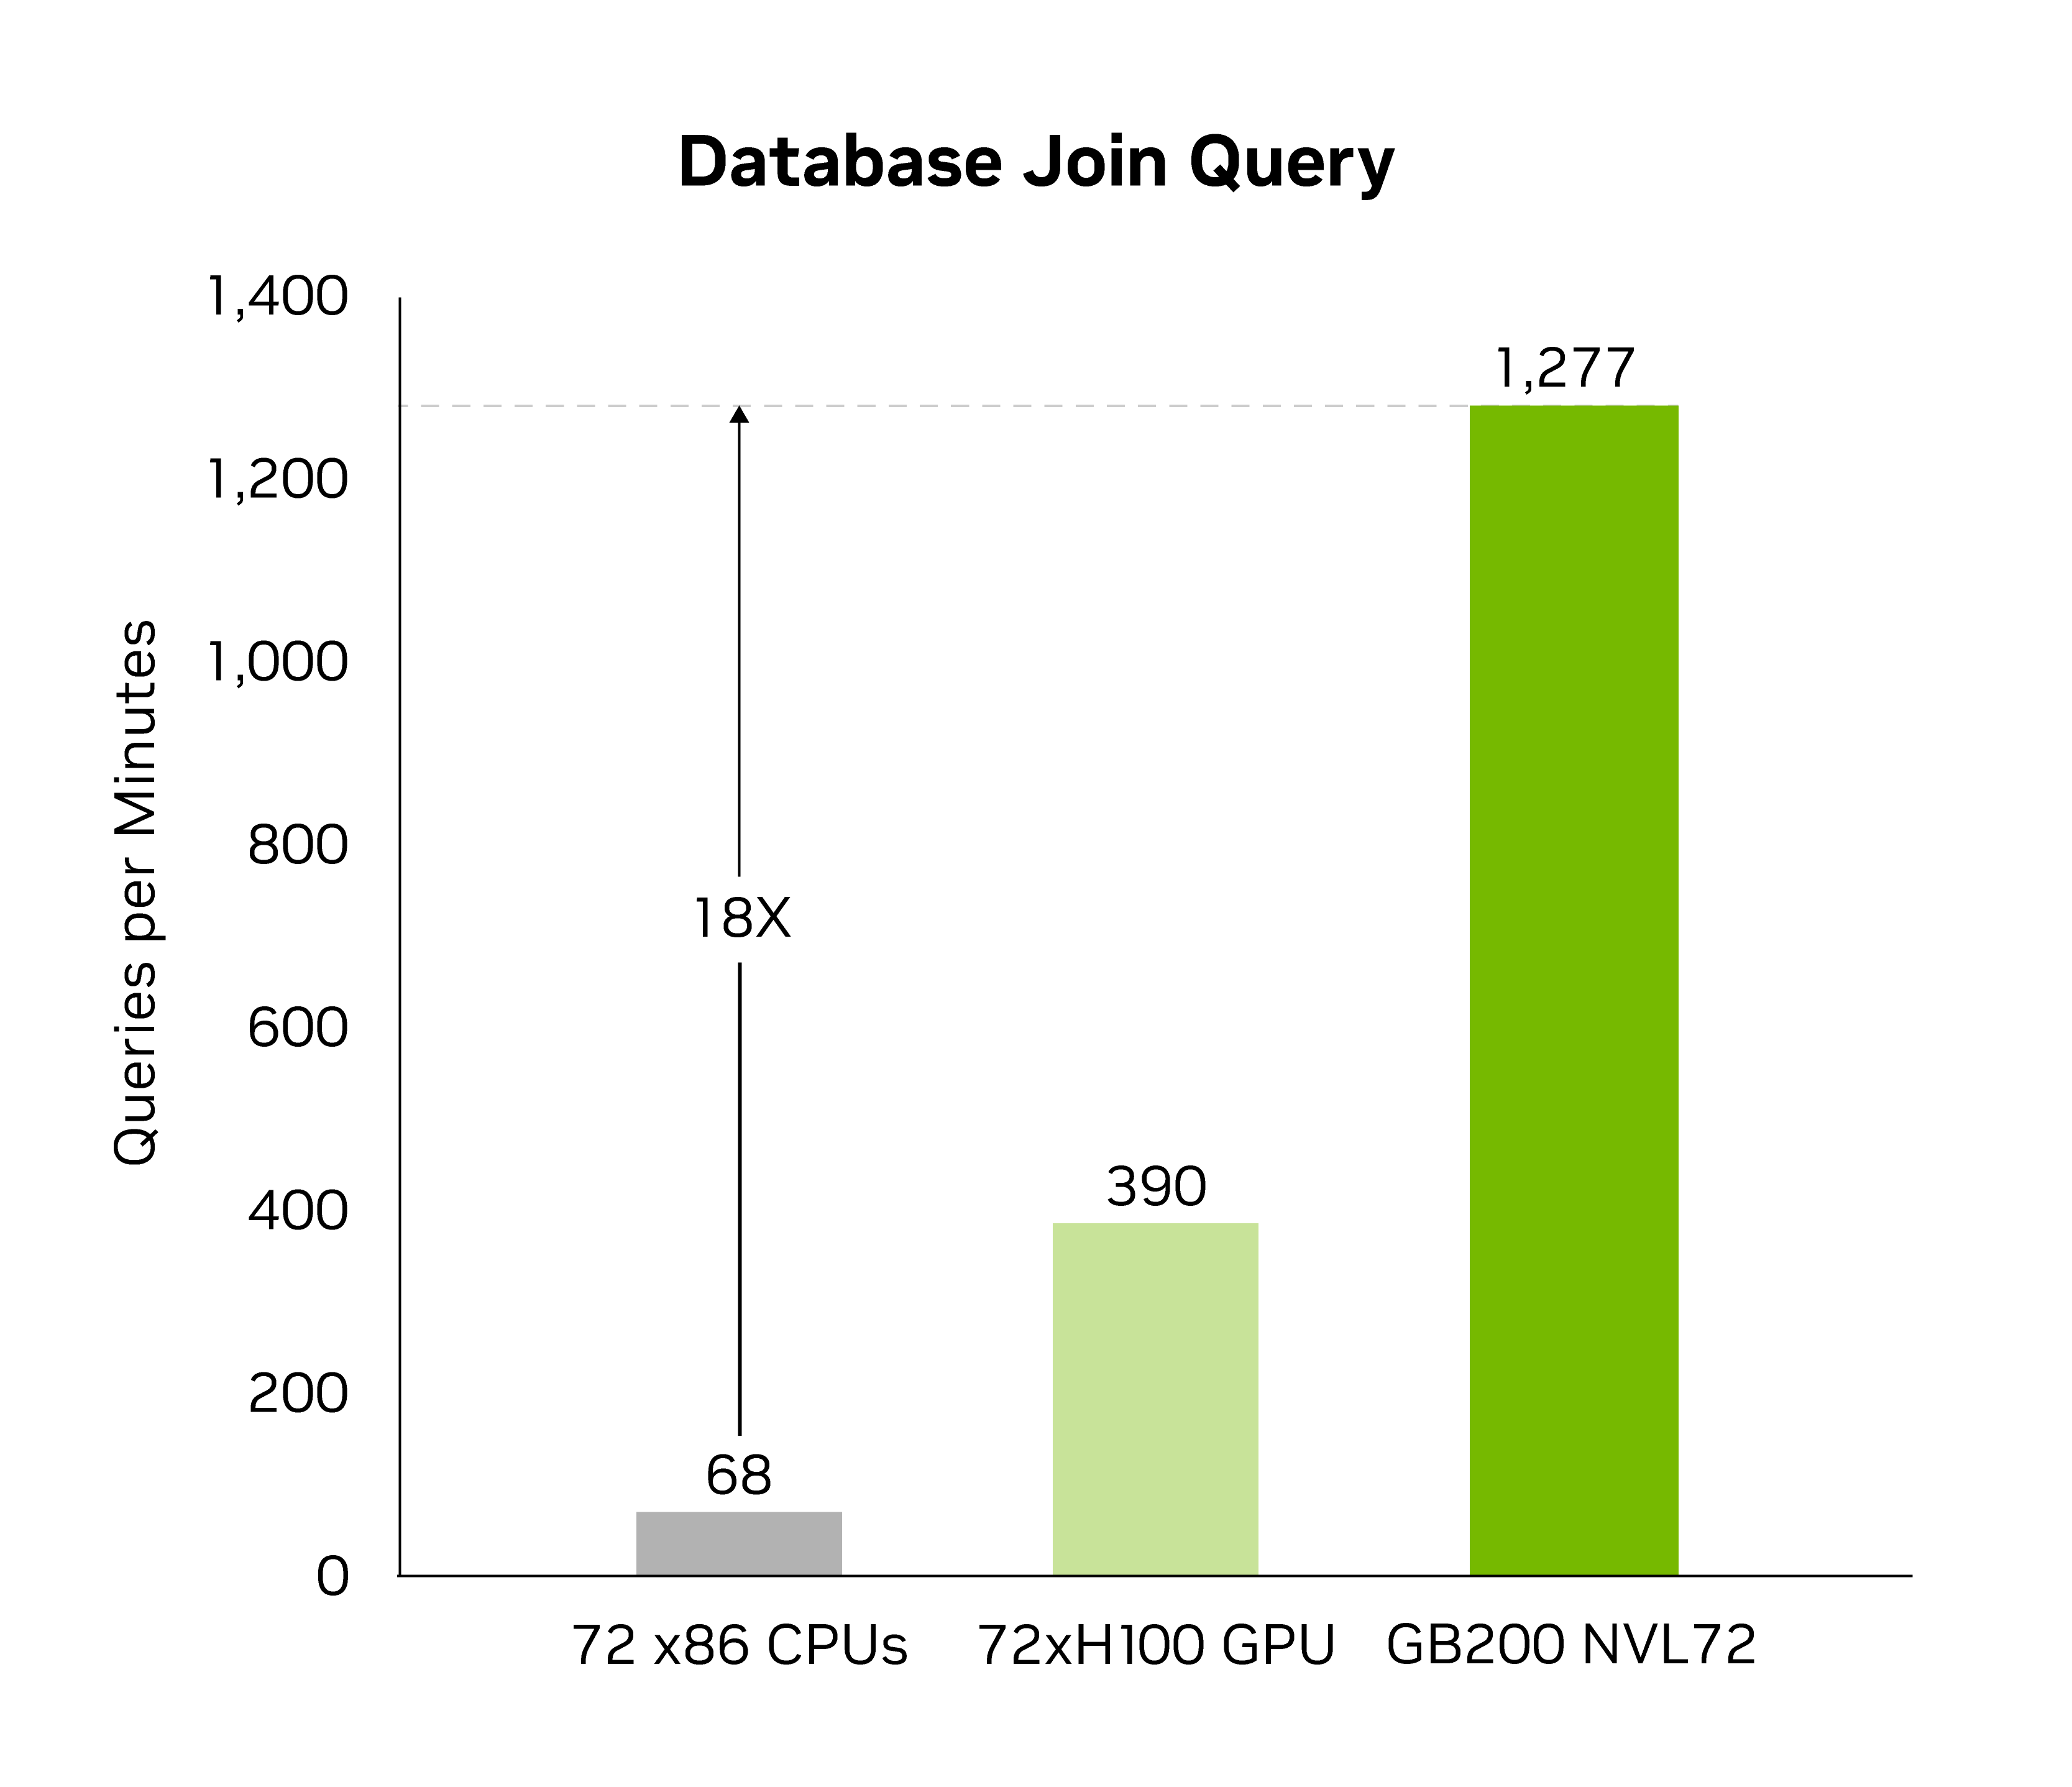 Bar chart with 3 columns for x86, H100, GB200 comparing queries per sec. 72 x86 is 68, 72xH100 is 390, and GB200 NVL72 is 1277, 18X more than x86.